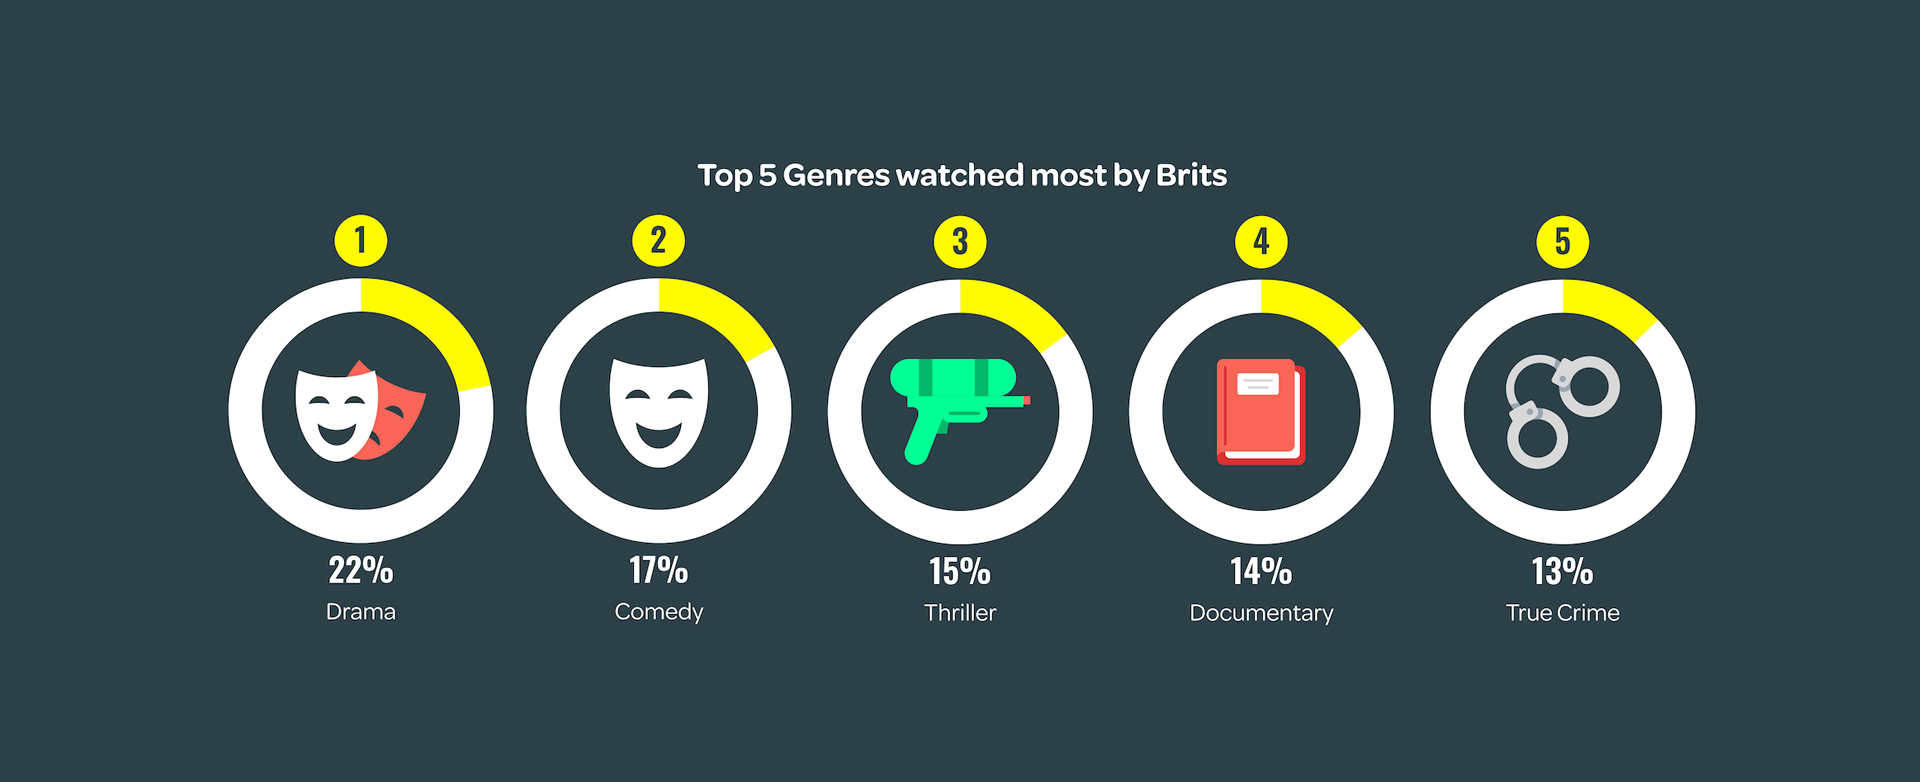 Top 5 genres watched most by Brits